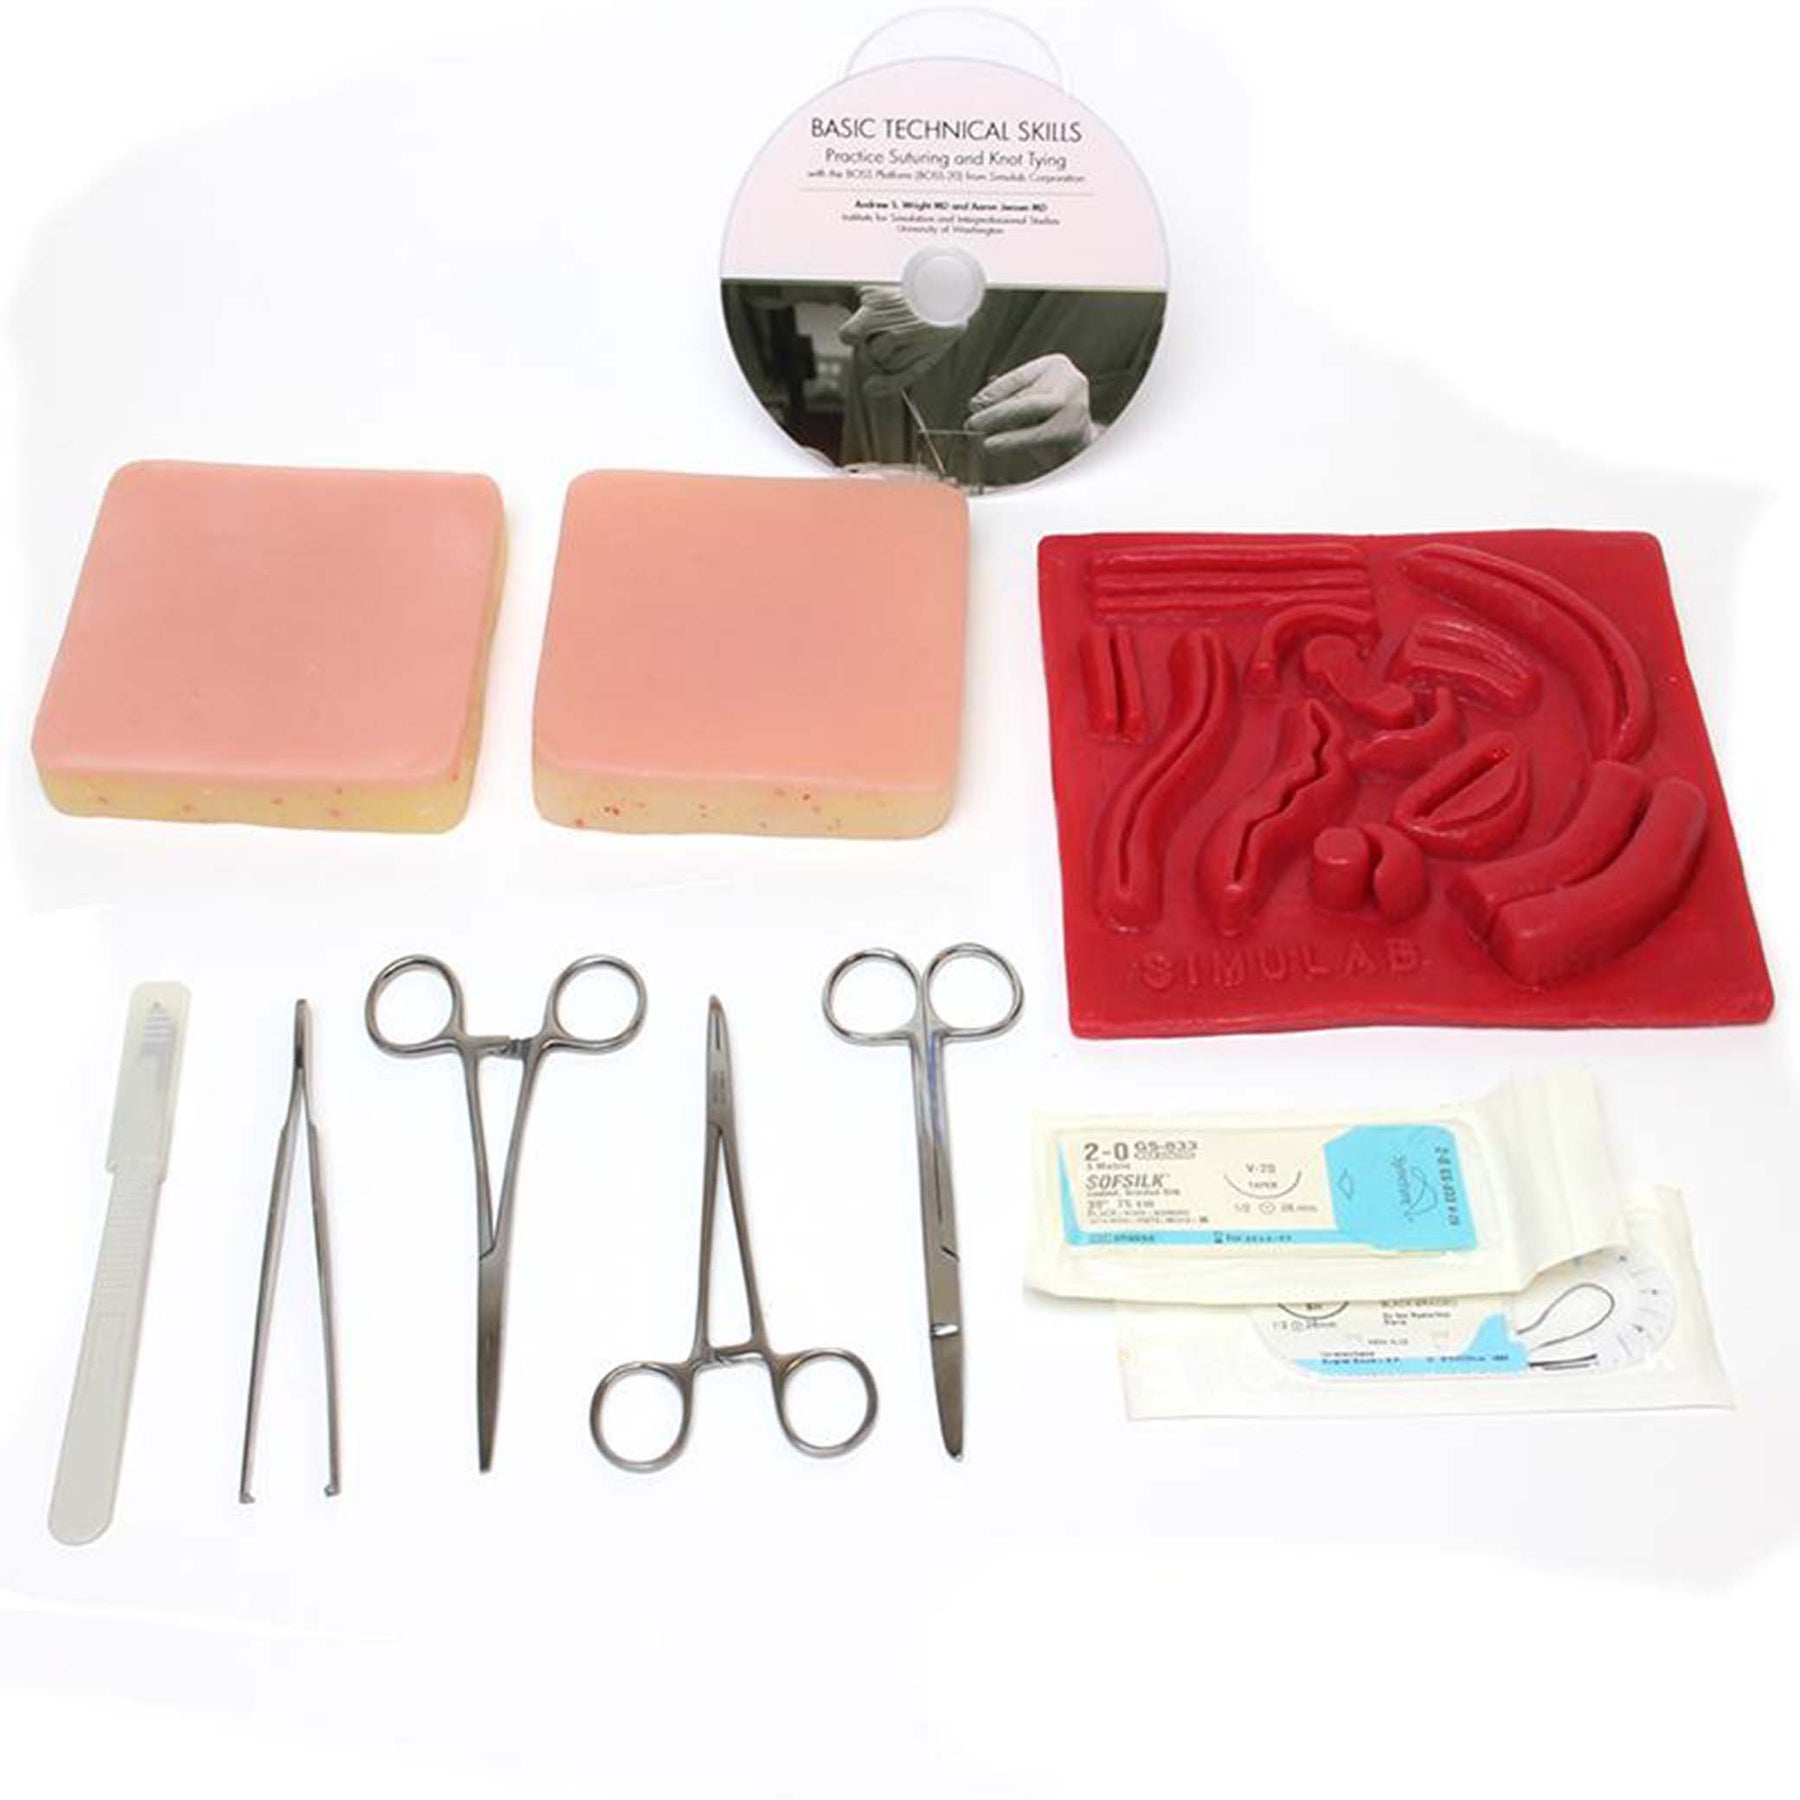 Surgical Suture Practice Kit For Medical Training, Suturing Pad With Tool  Set